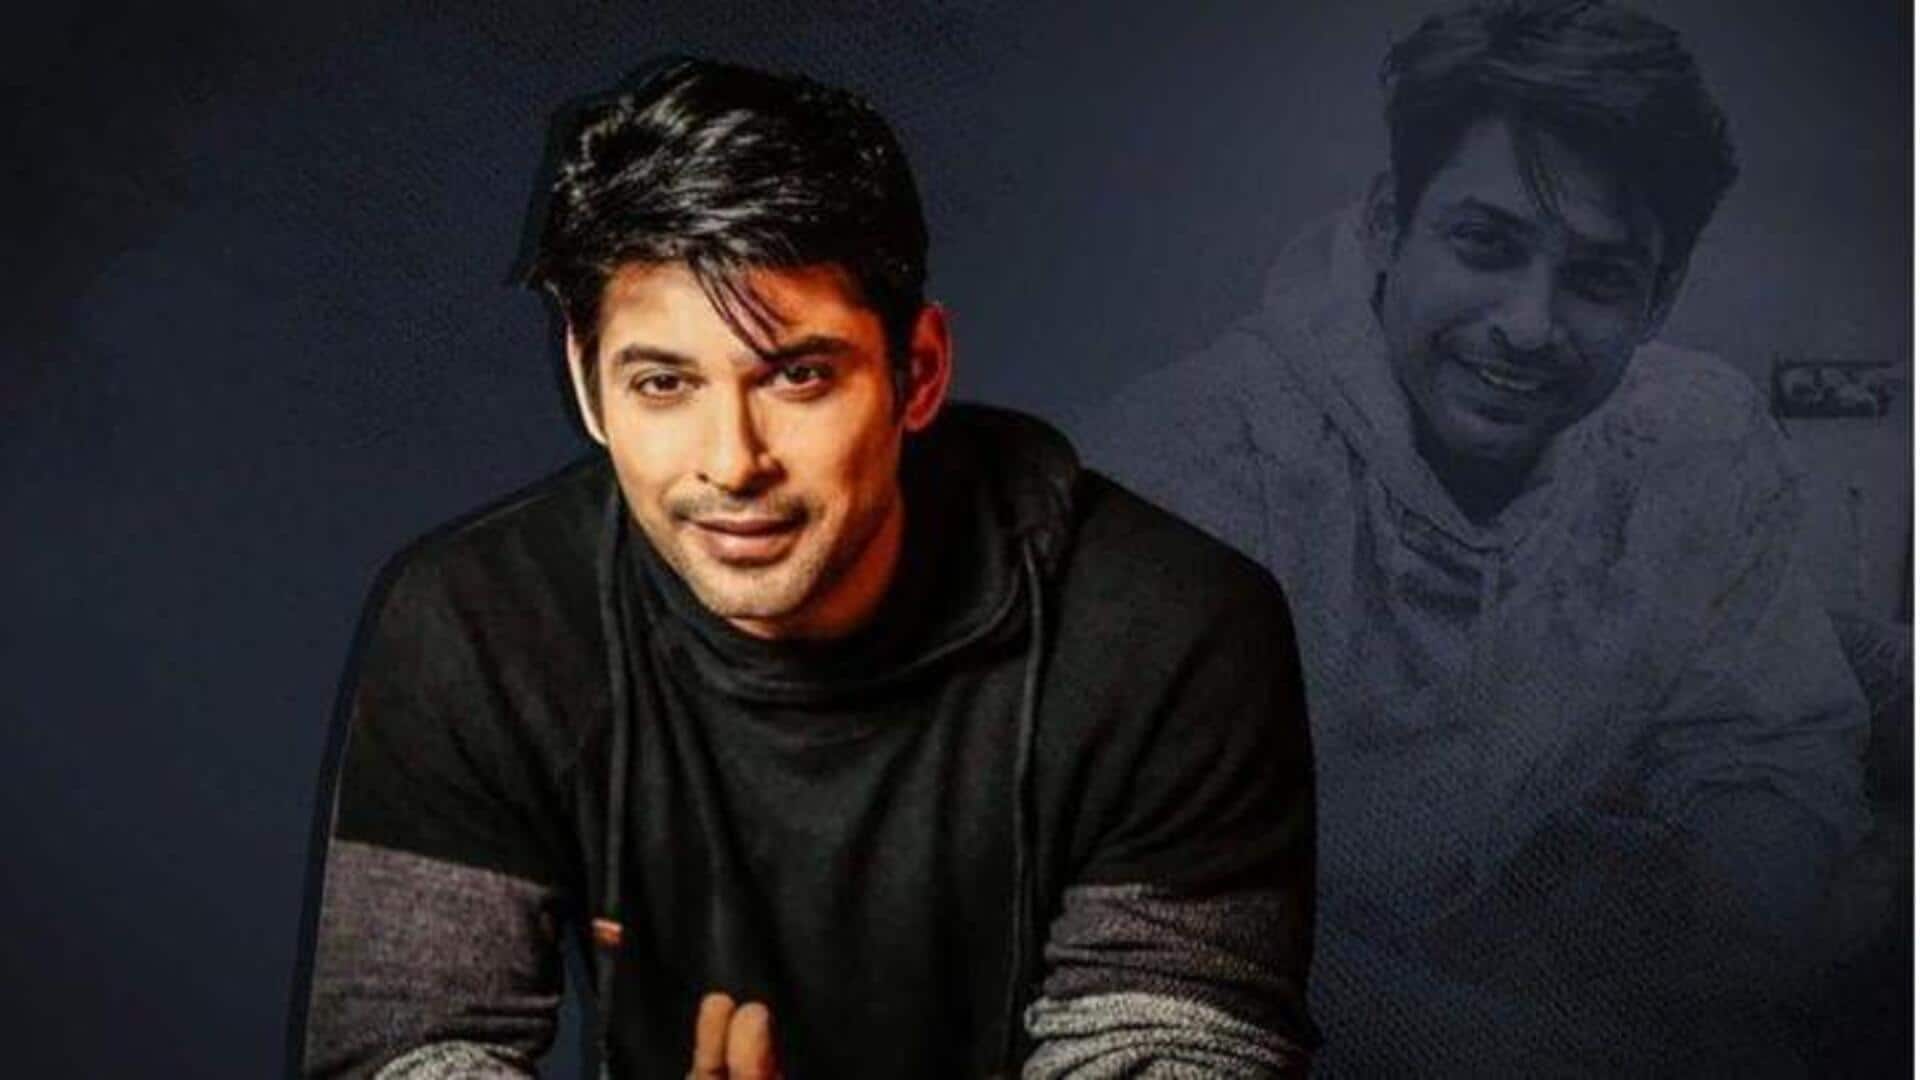 Remembering Sidharth Shukla: Looking at his friendships in 'Big Boss'